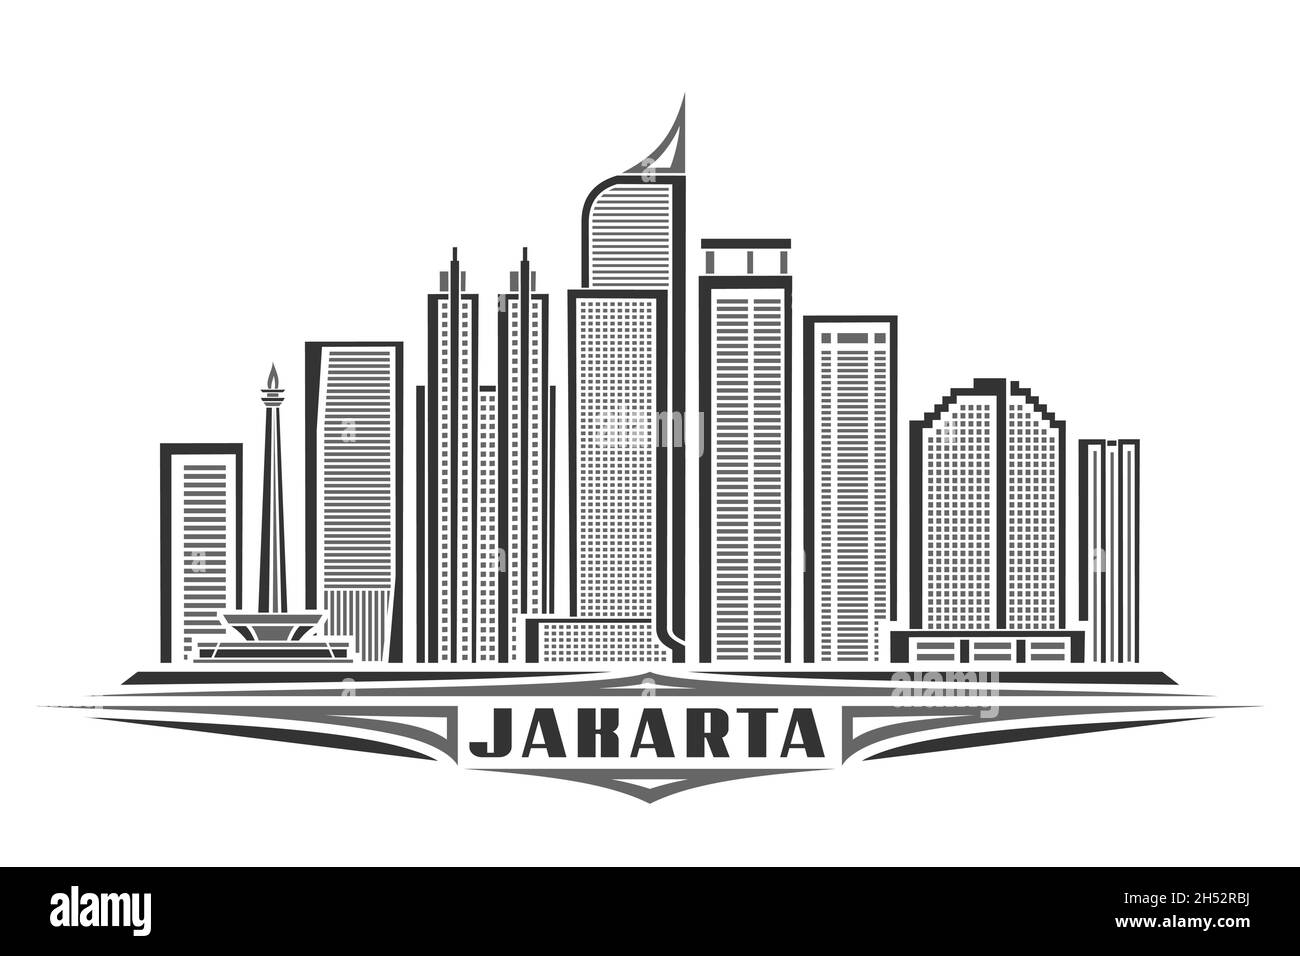 Vector illustration of Jakarta, monochrome horizontal poster with linear design famous jakarta city scape, urban line art concept with decorative lett Stock Vector